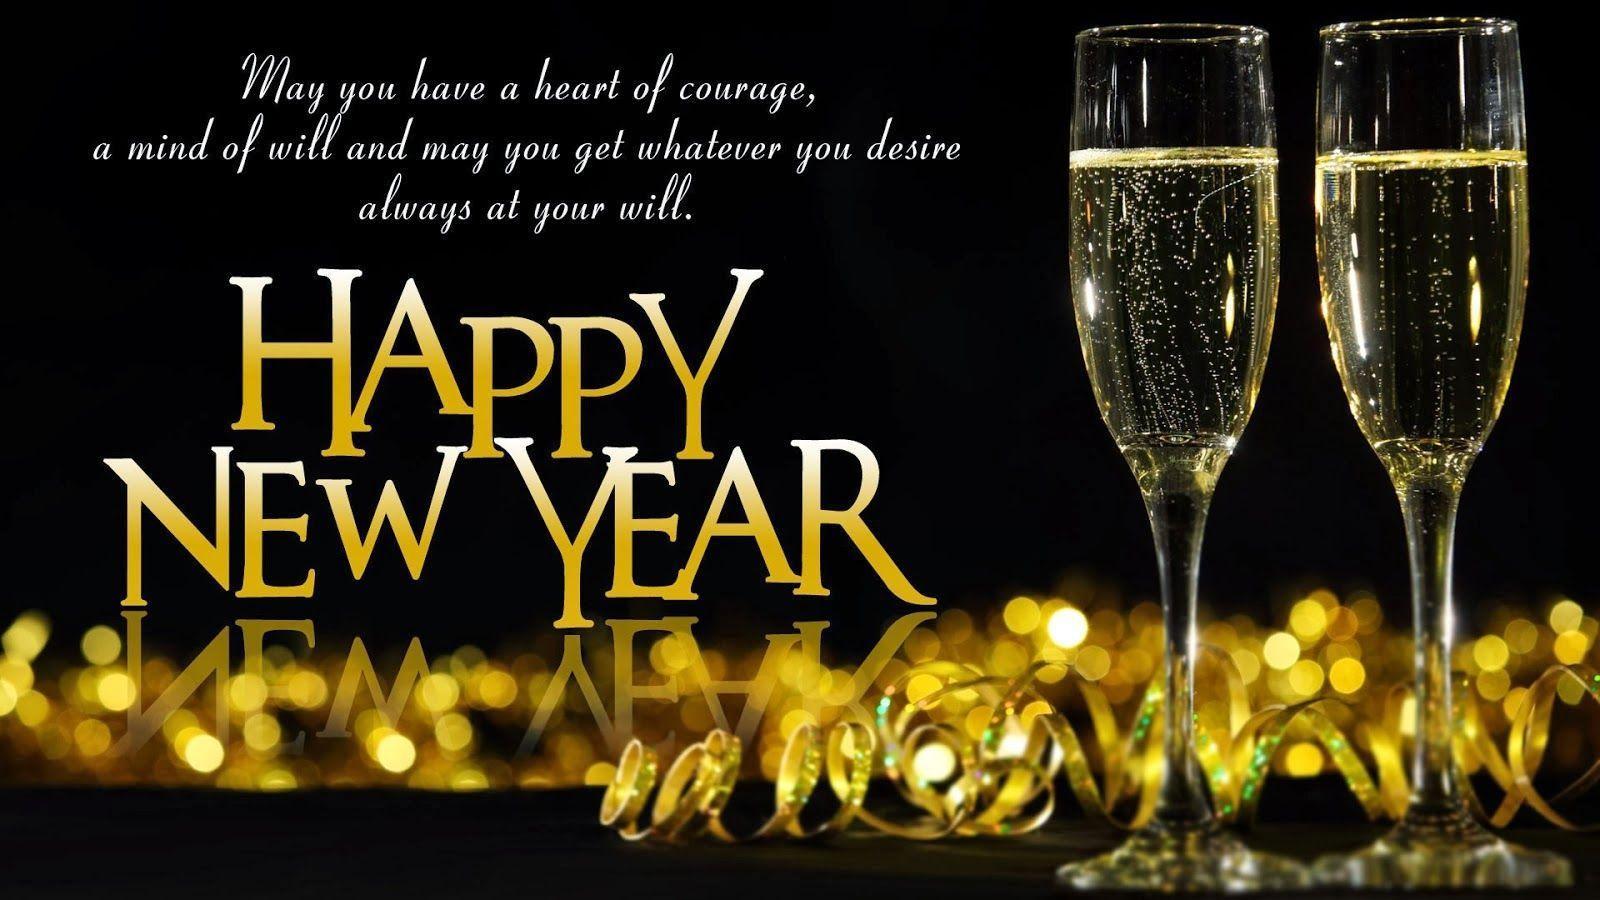 Happy new year 2015 Quotes in Tamil